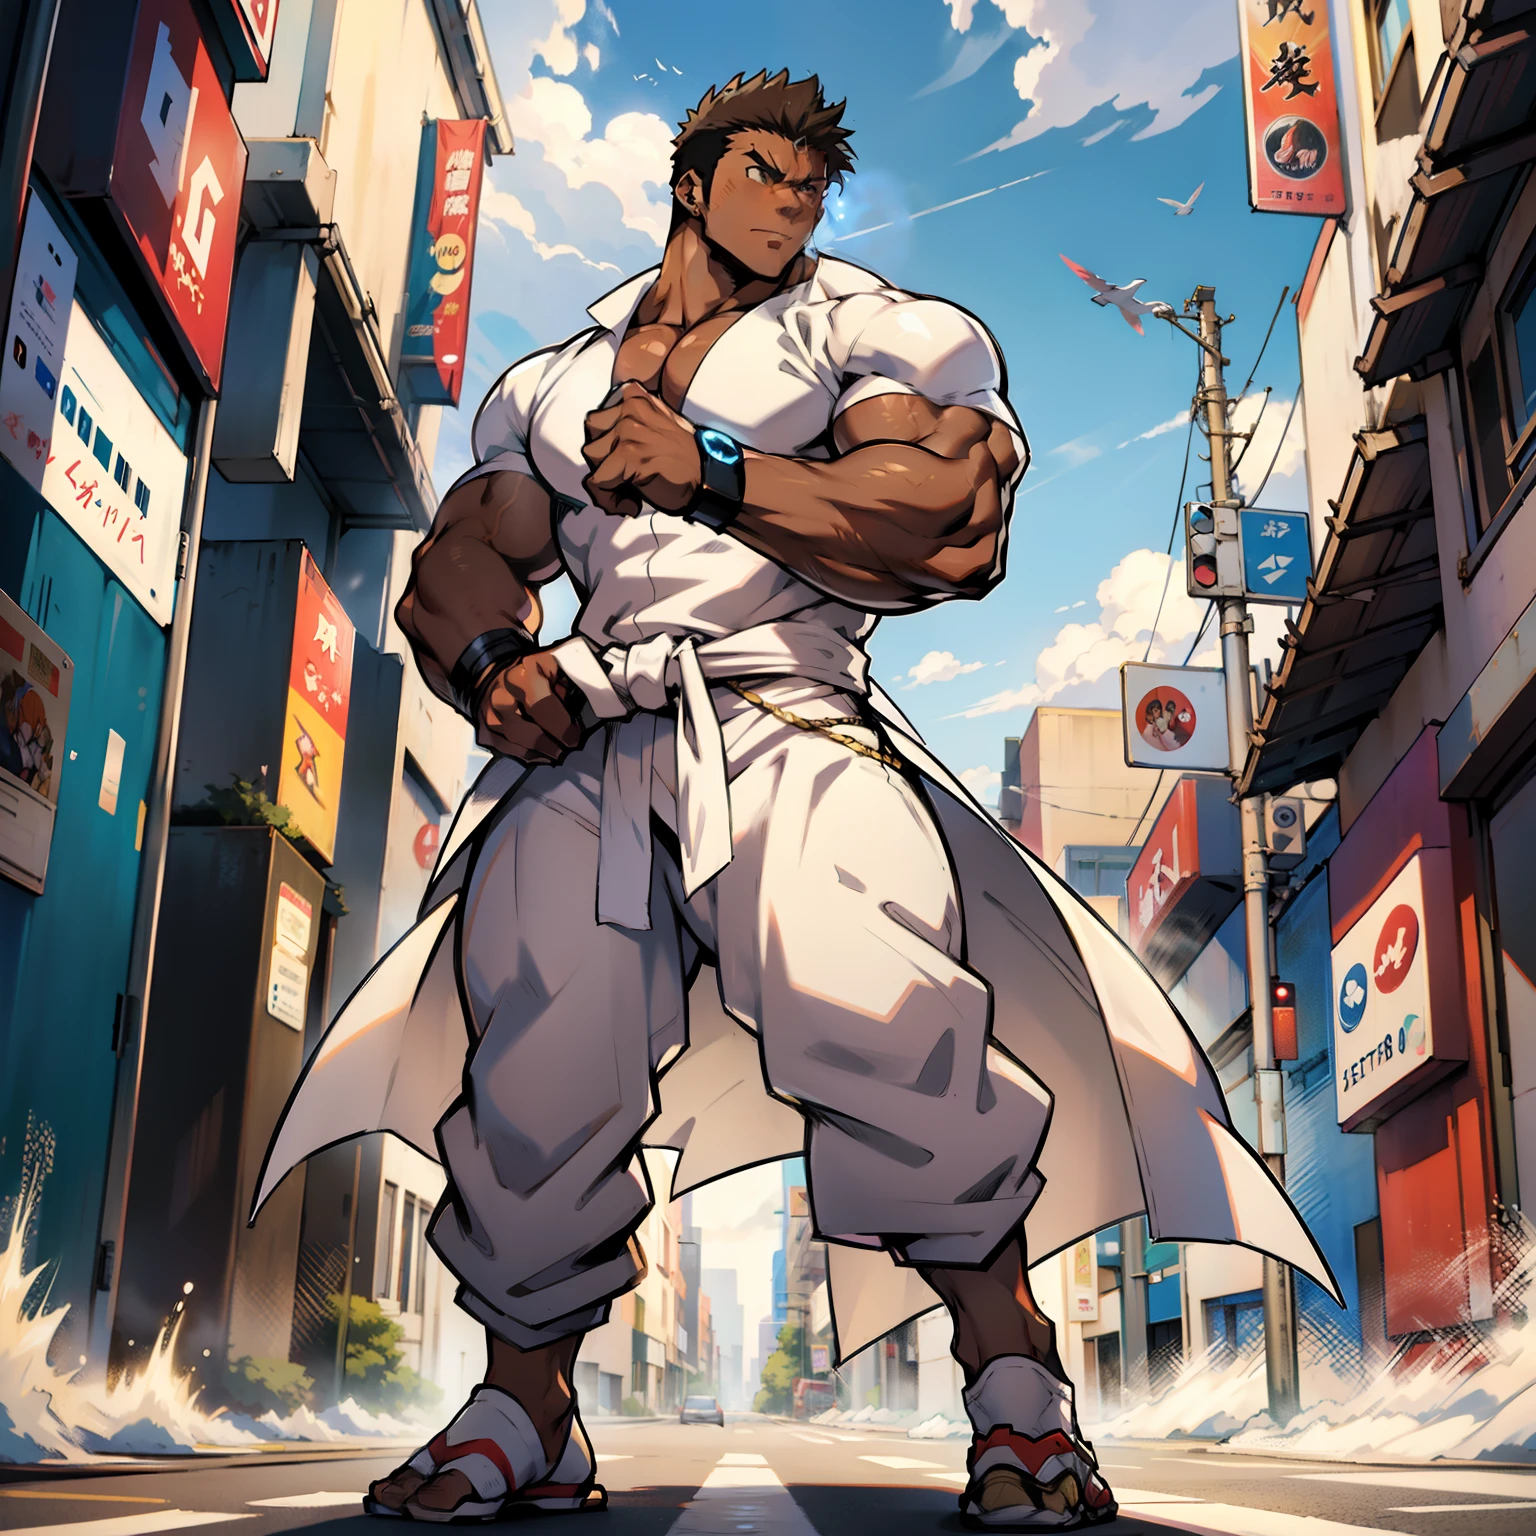 ((Anime style art)), Extremely muscular masculine character,dancer, brown skin, n white robes, wind , futuristic city street 
AS . Main character from the anime, superhero, Nice image, Hard drive, 4k, Main